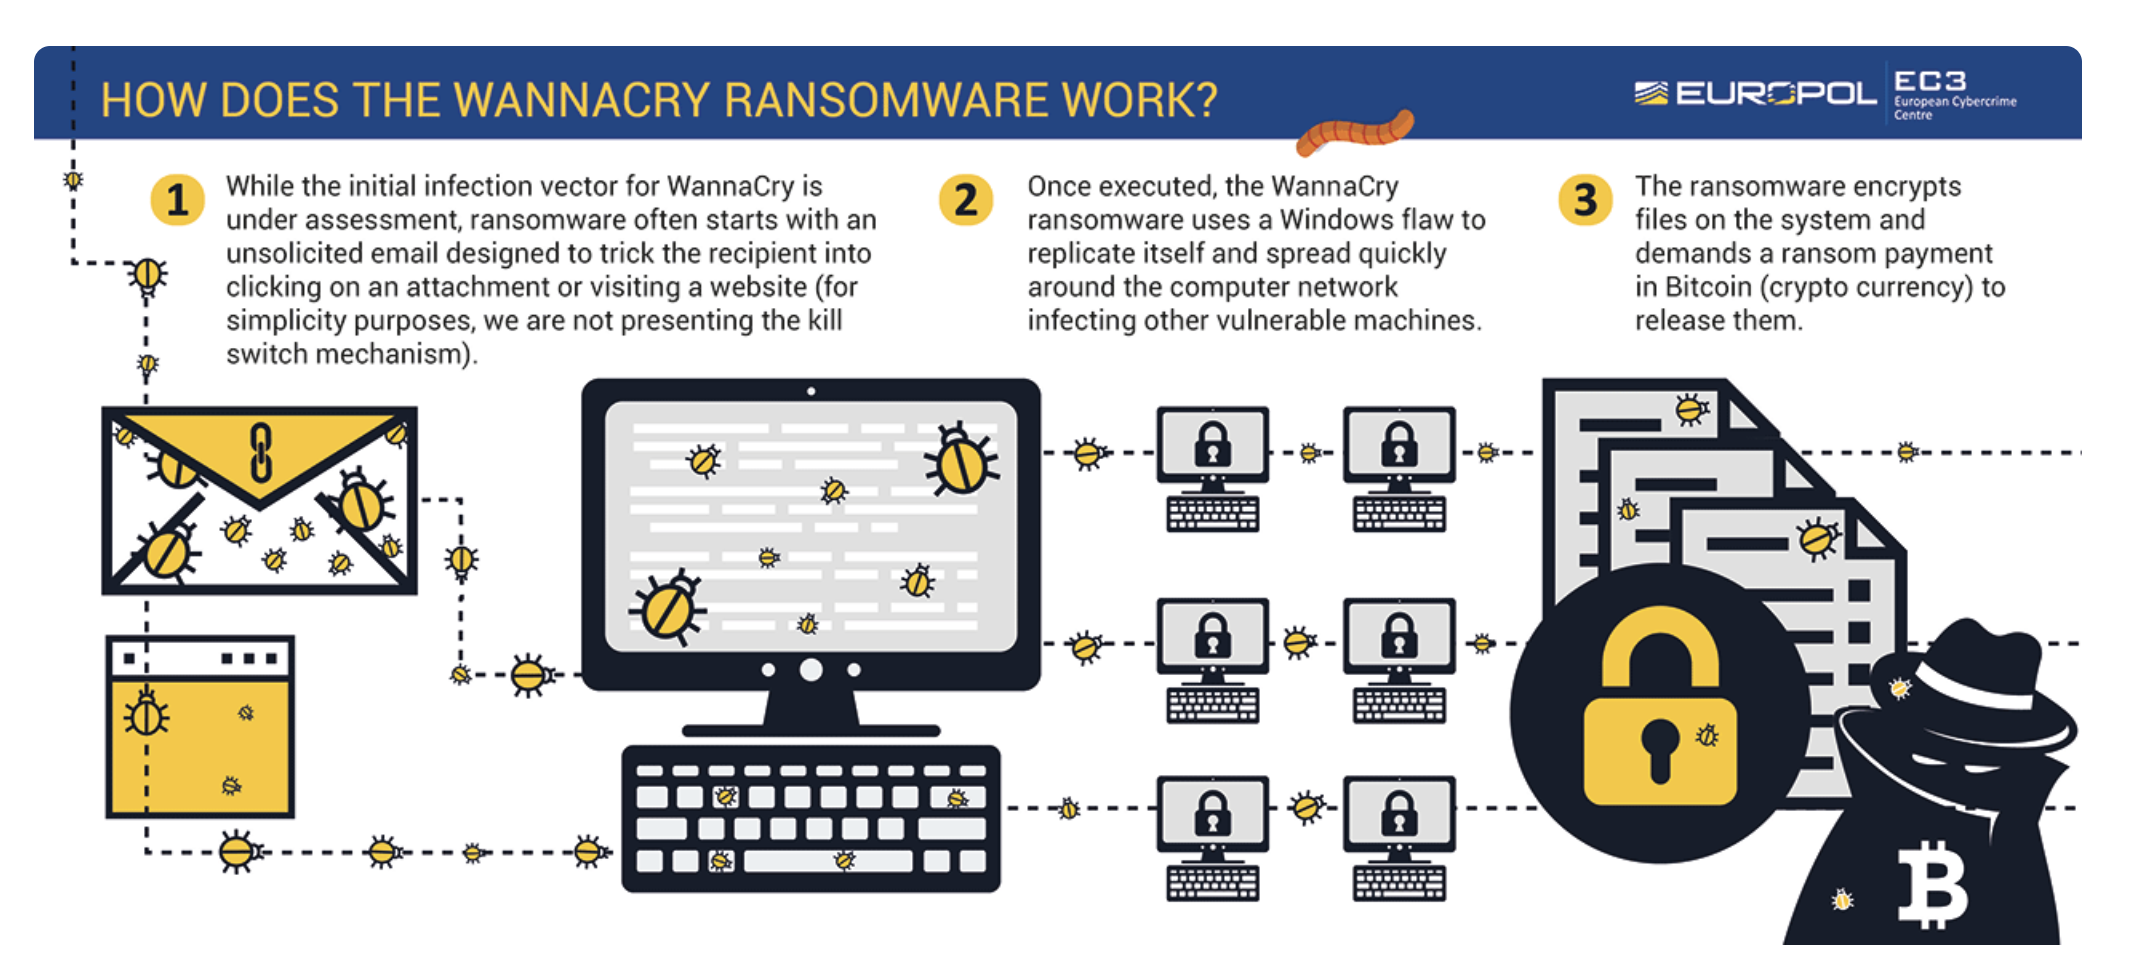 How does the WannaCry ransomware work?